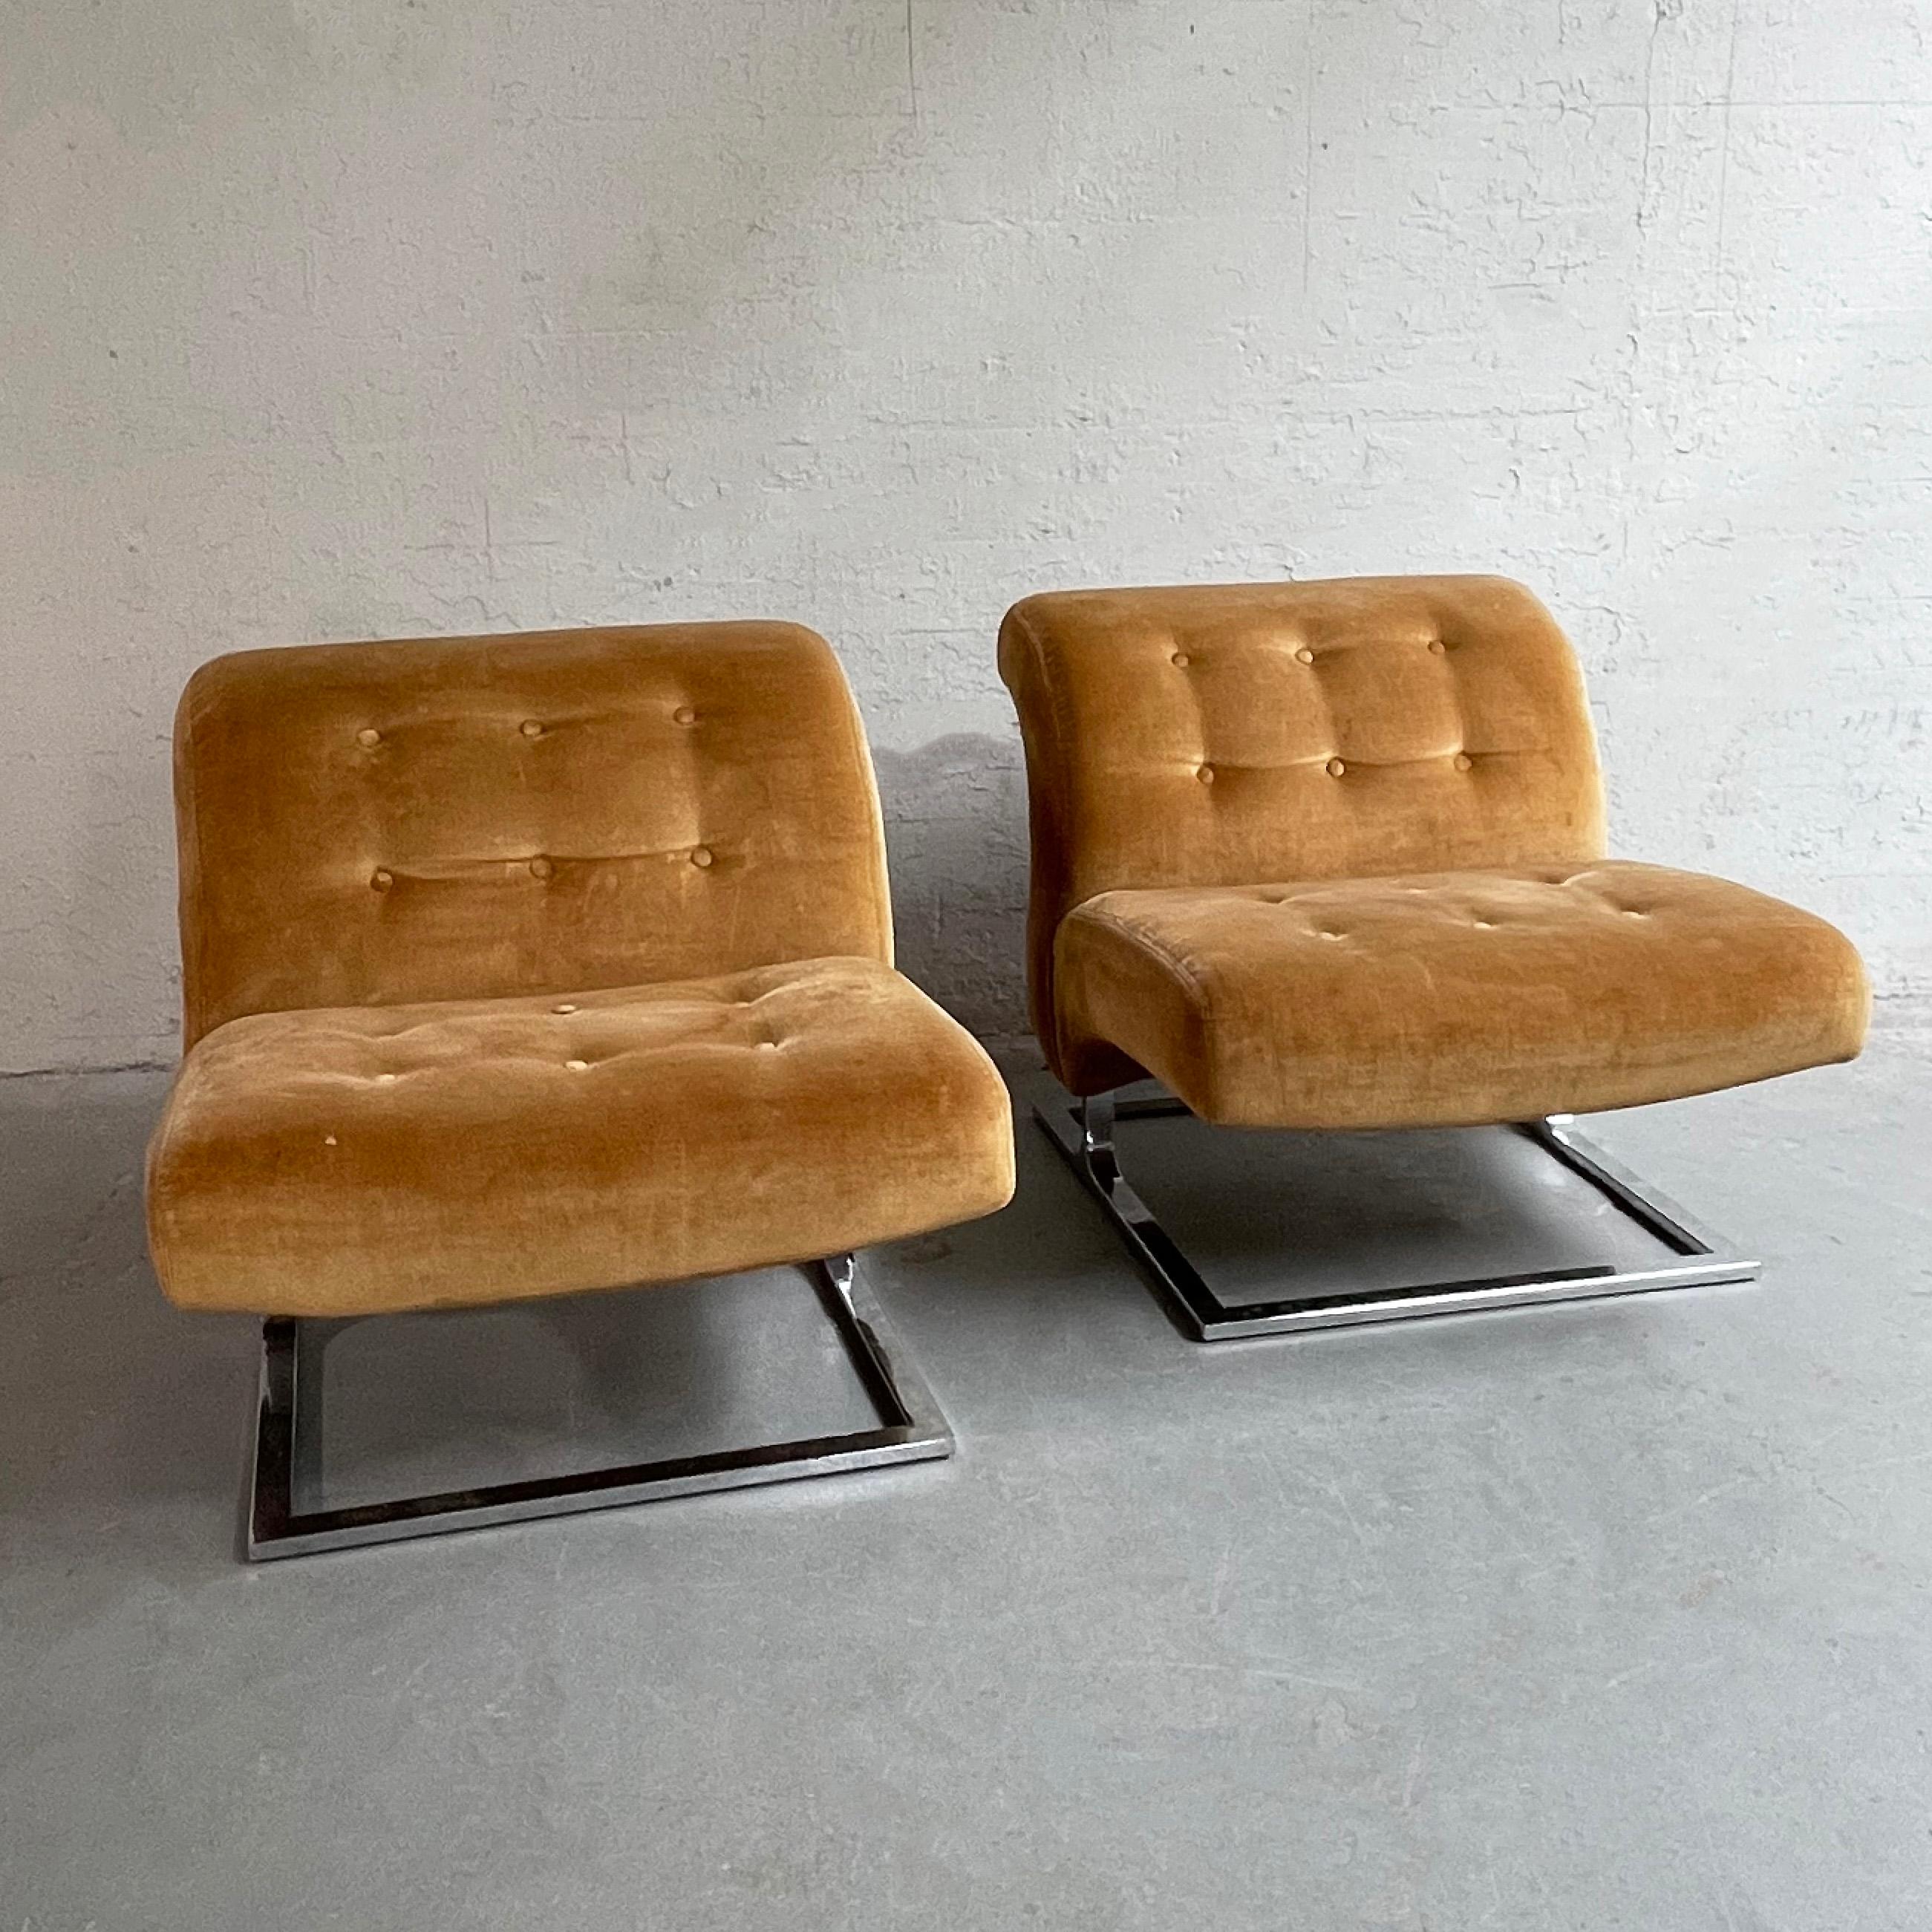 Pair Of Mid-Century Modern Chrome Cantilever Slipper Lounge Chairs In Good Condition For Sale In Brooklyn, NY